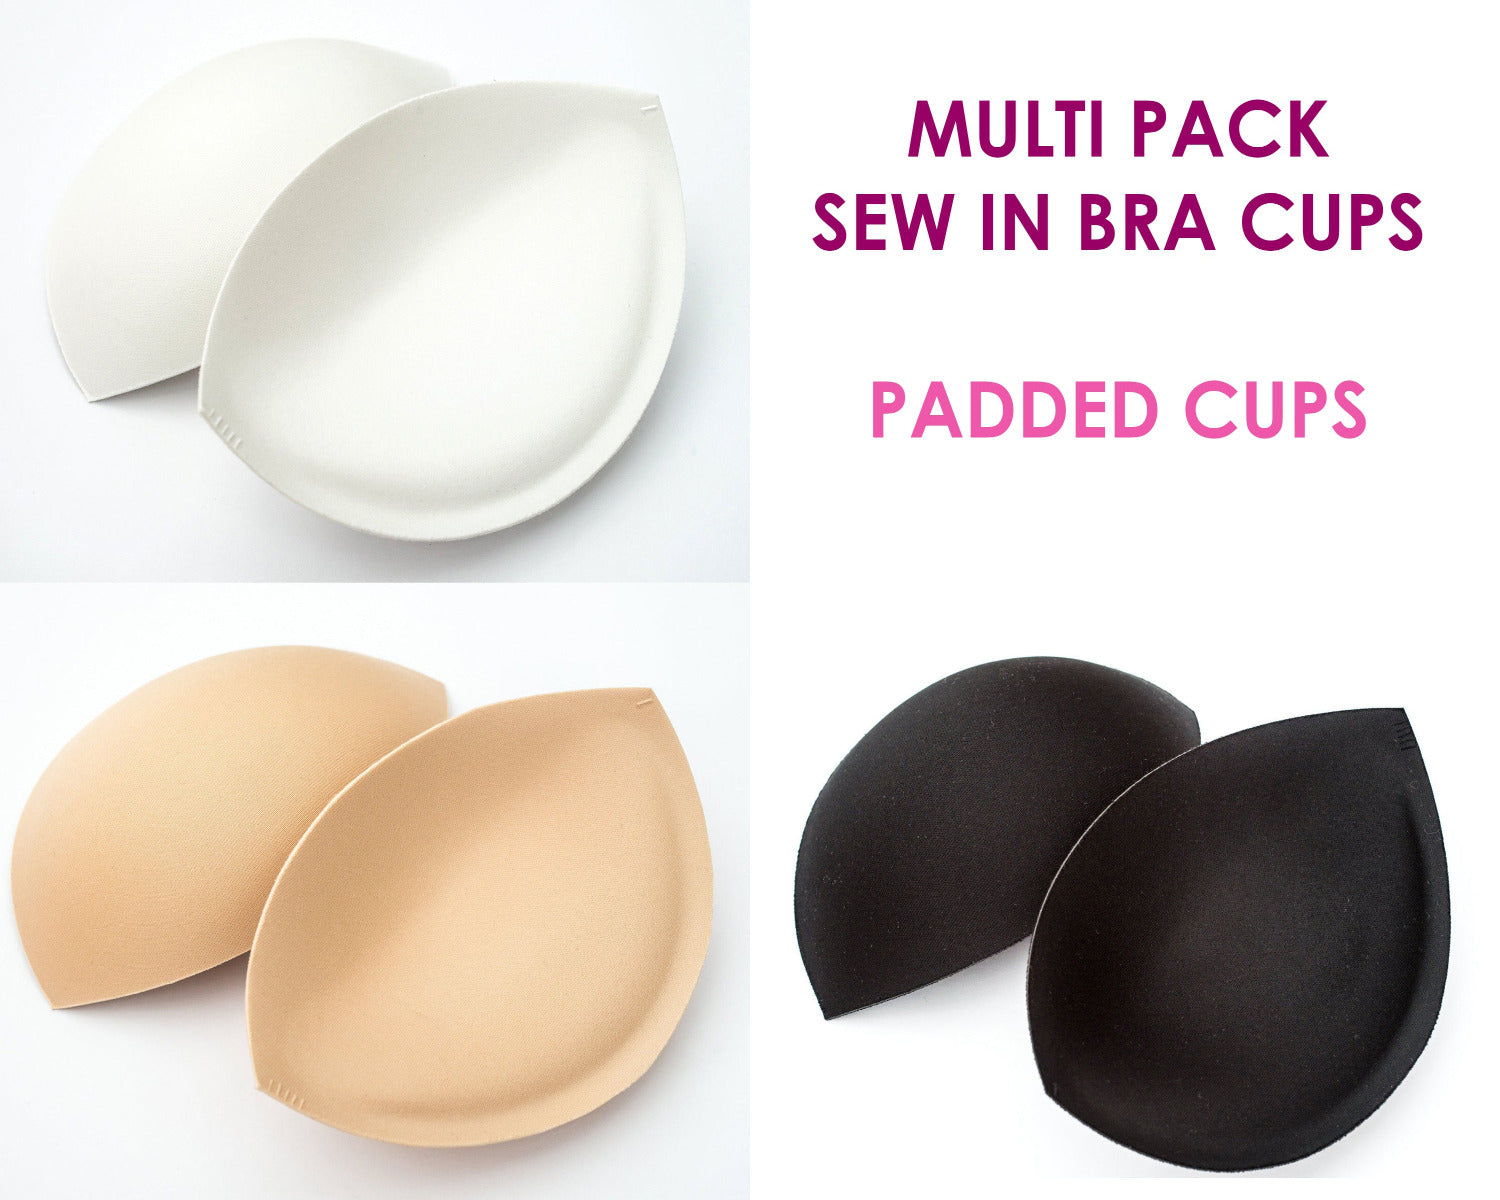 MULTI-PACK of PUSH UP Sew in Bra Cups - Perfect for Dress-Makers or Bridal  Shops